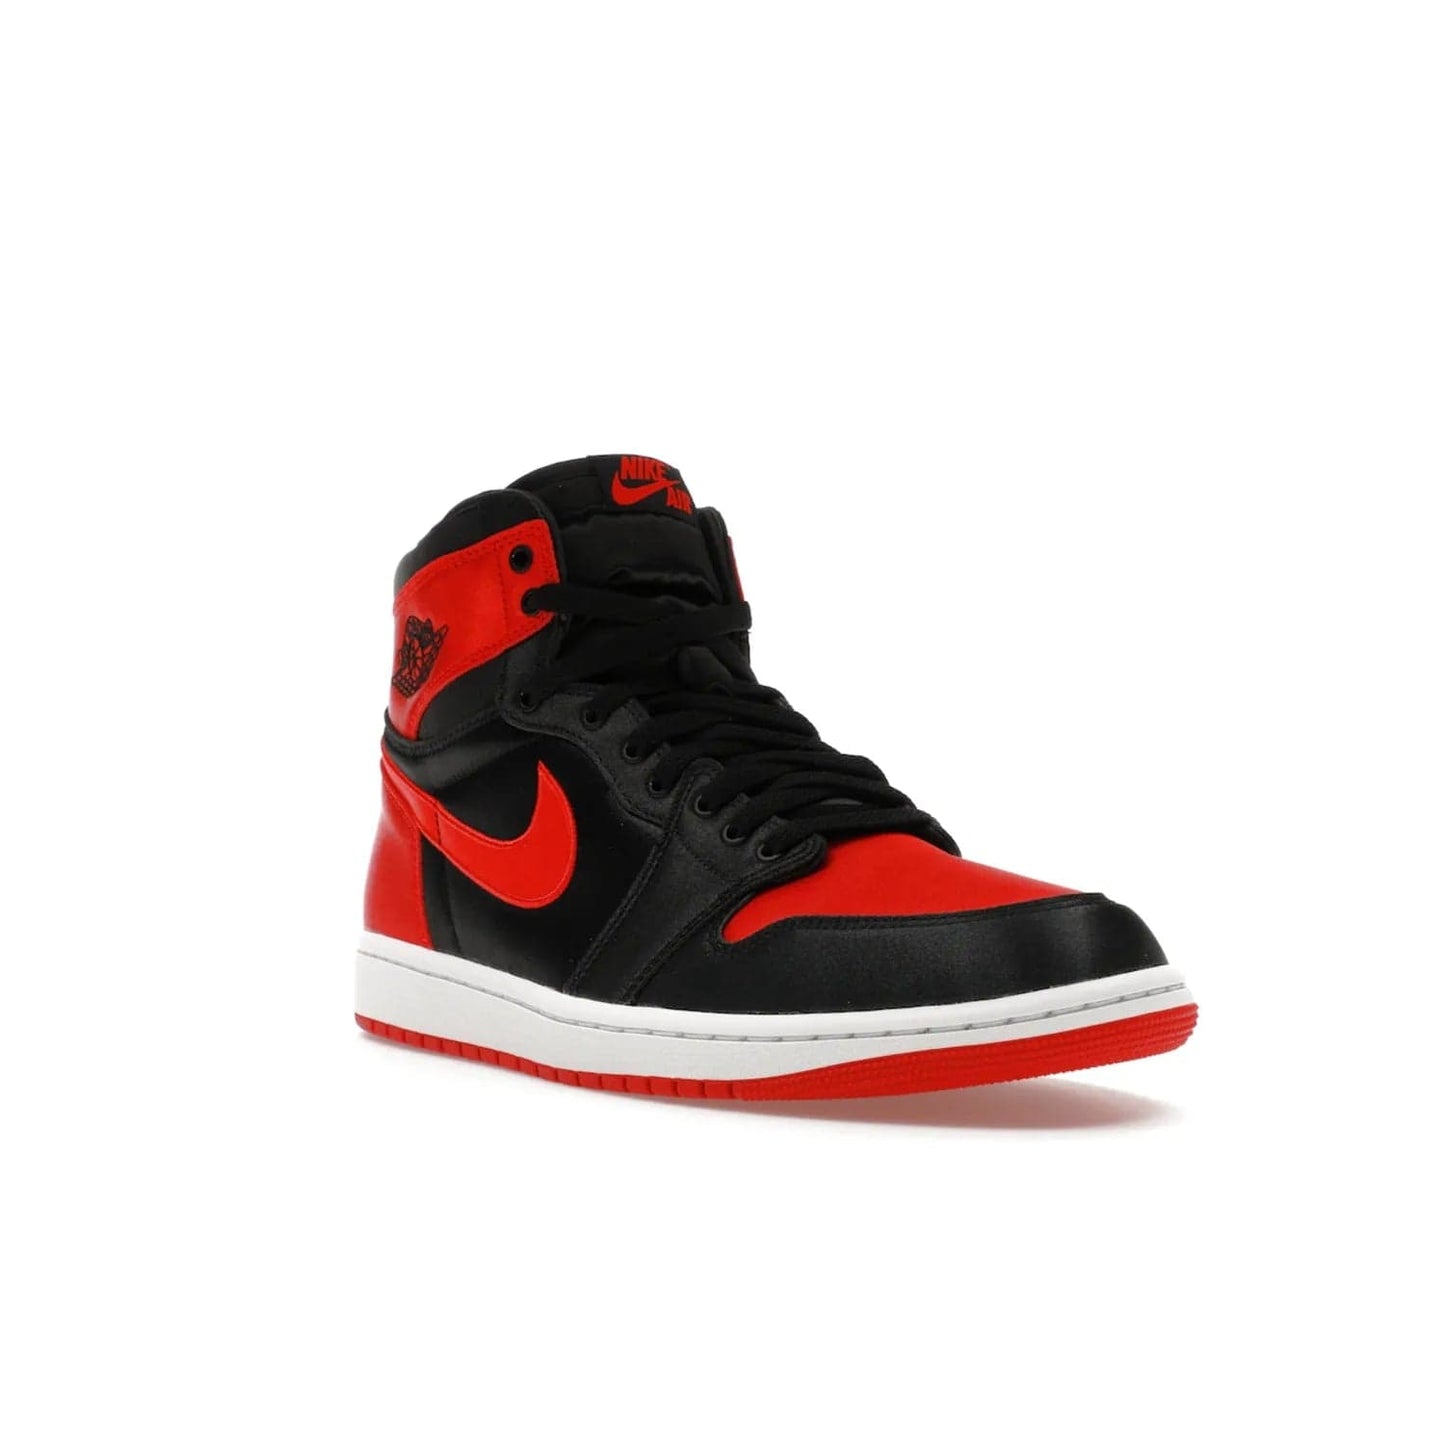 Jordan 1 Retro High OG Satin Bred (Women's) - Image 6 - Only at www.BallersClubKickz.com - Introducing the Jordan 1 Retro High OG Satin Bred (Women's). Luxe satin finish, contrasting hues & classic accents. Trending sneakers symbolizing timelessness & heritage. Make a bold statement with this iconic shoe. Available October 4, 2023.